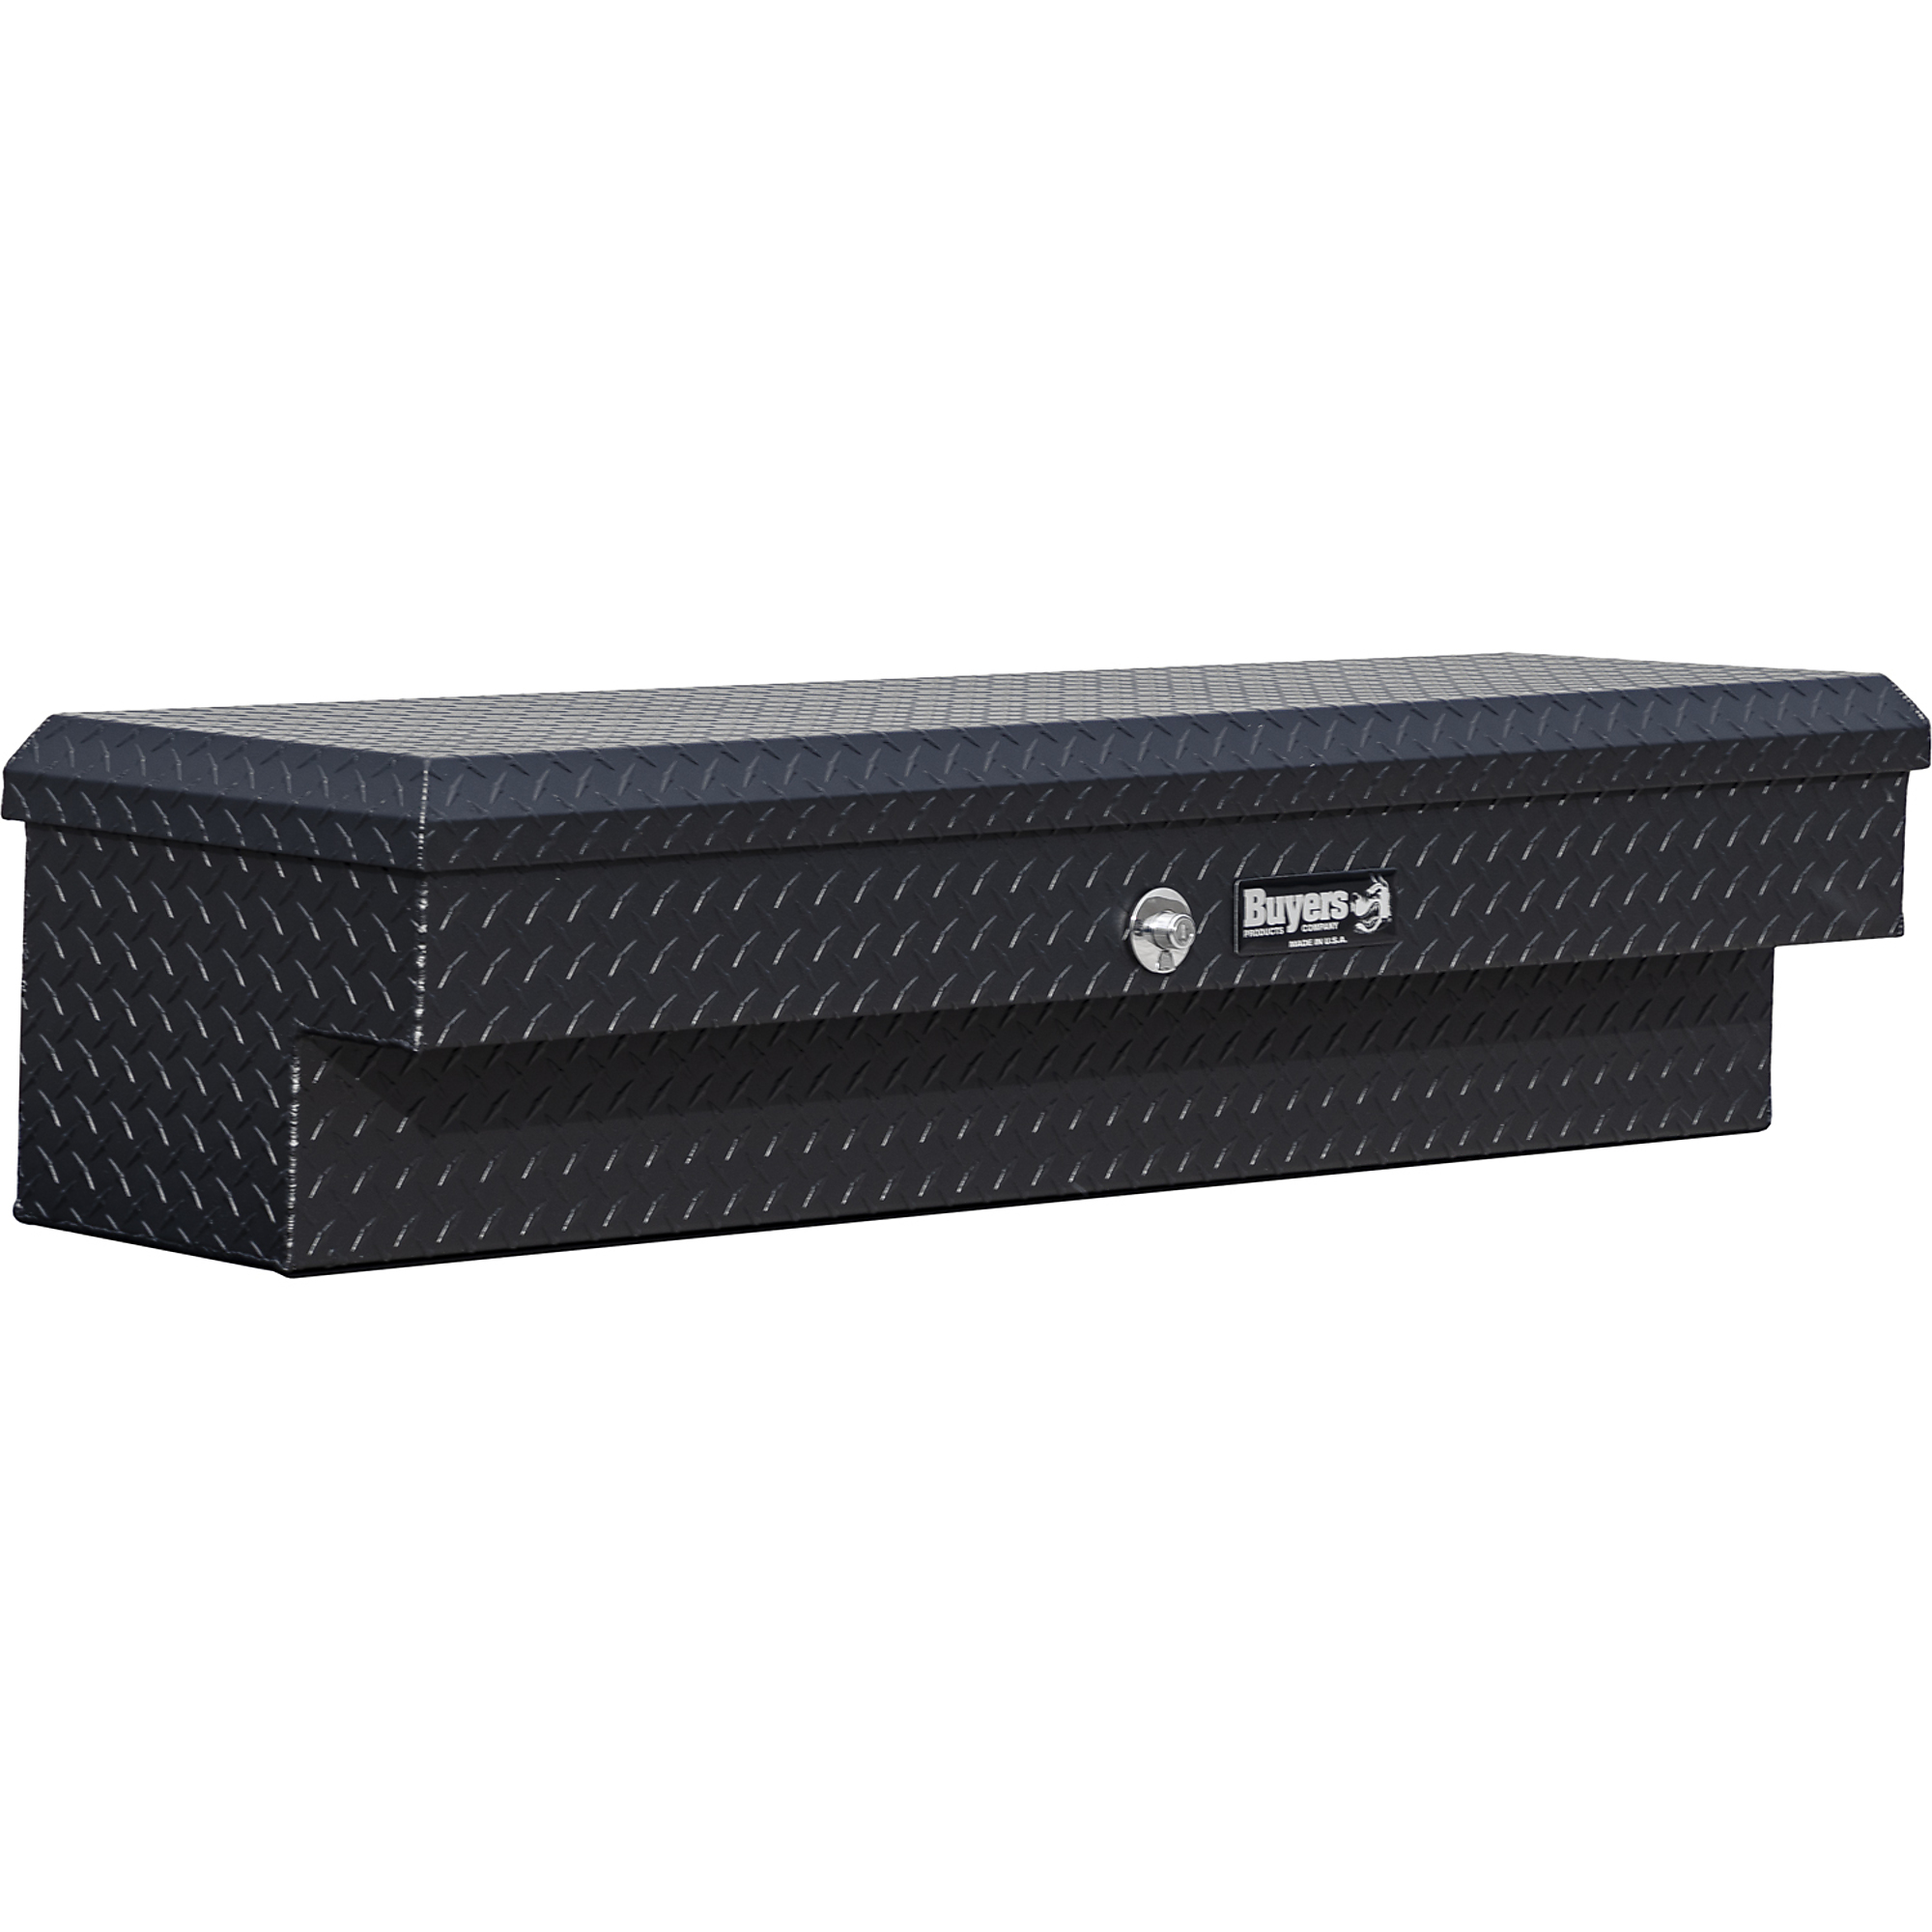 Buyers Products, 13X16X47 Diamond Tread Aluminum Lo-Sider Truck Box, Width 16 in, Material Aluminum, Color Finish Textured Matte Black, Model 1733015